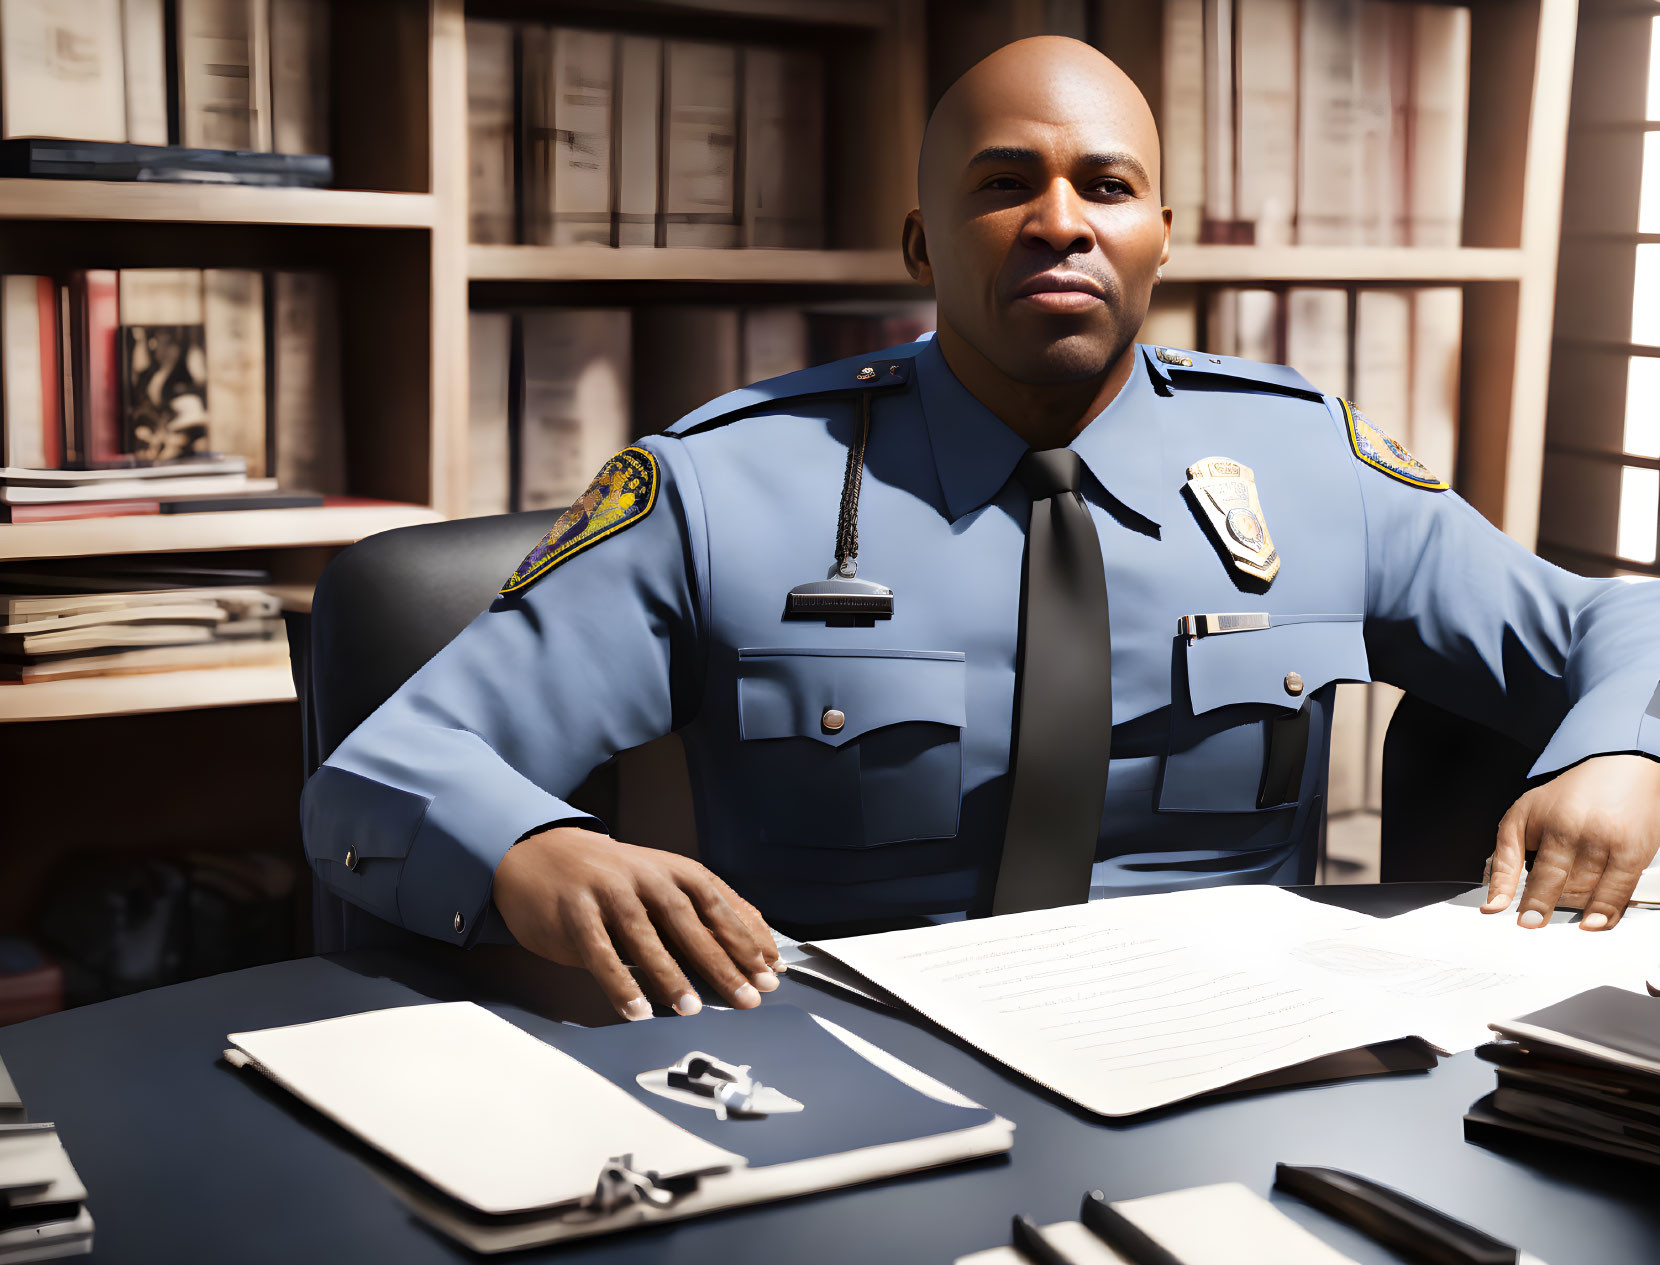 Police officer in uniform at desk with paperwork and bookshelves